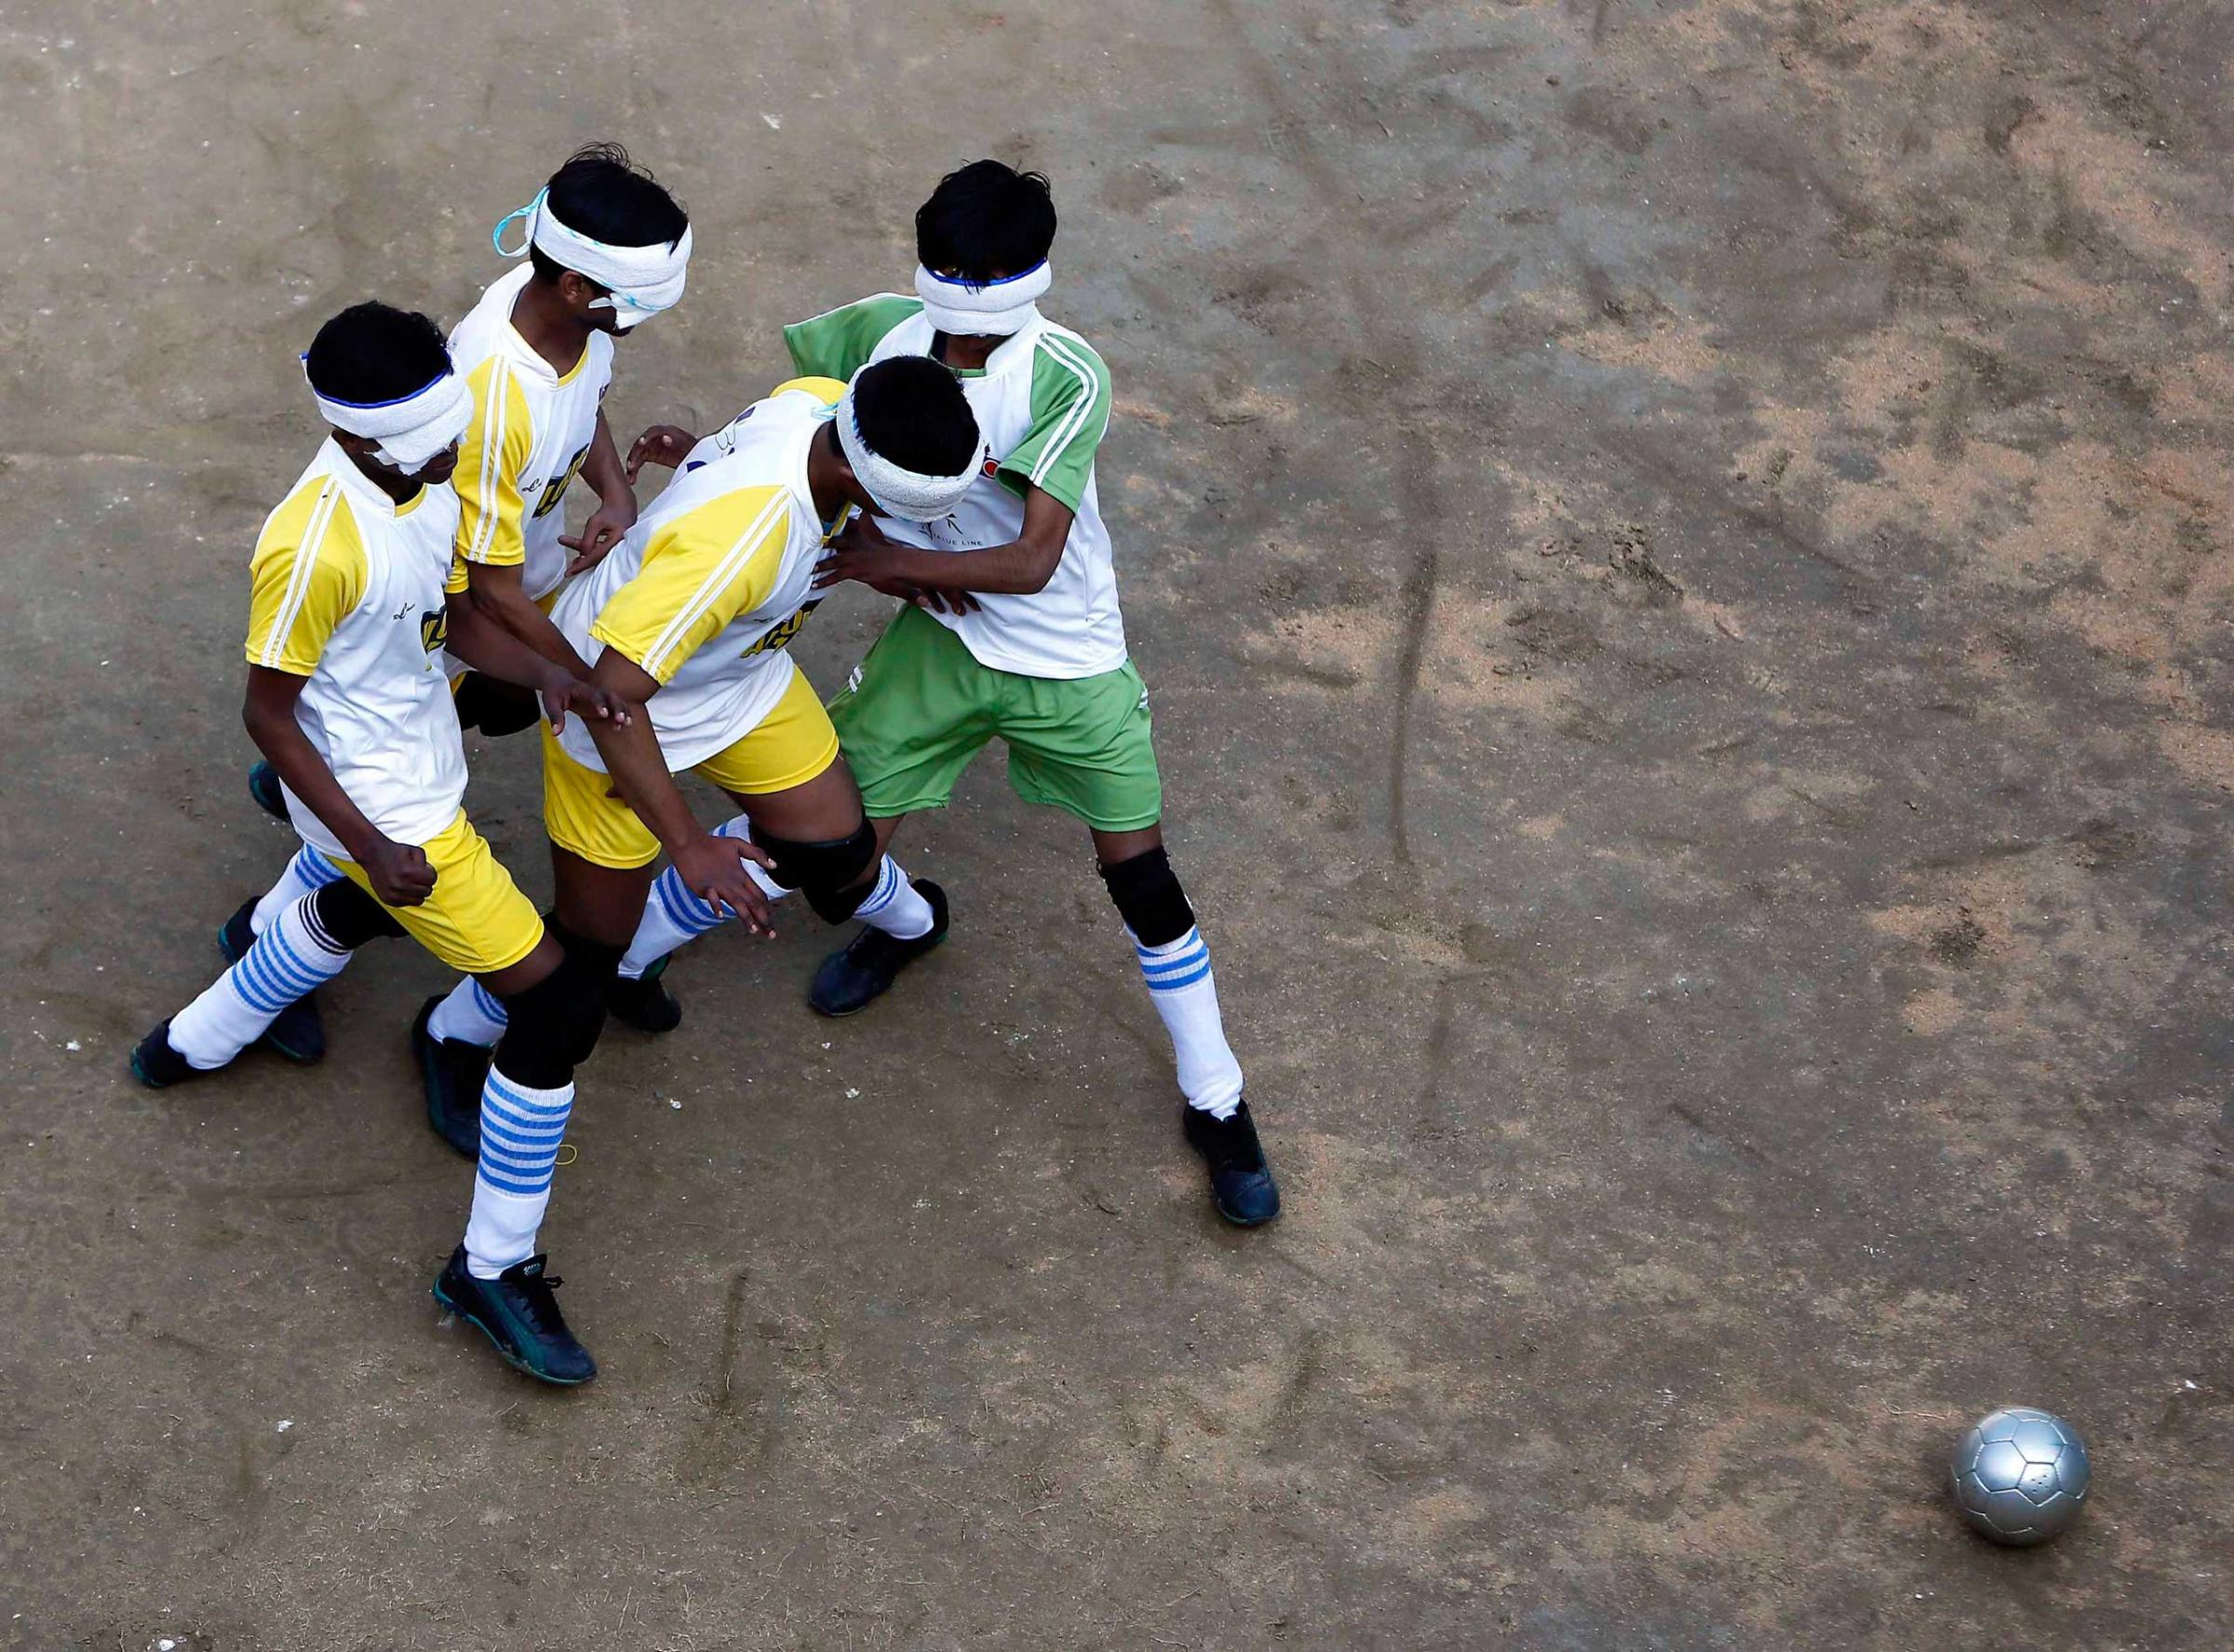 Visually impaired students of a school for the blind fight for the ball during a soccer match inside their school in New Delhi